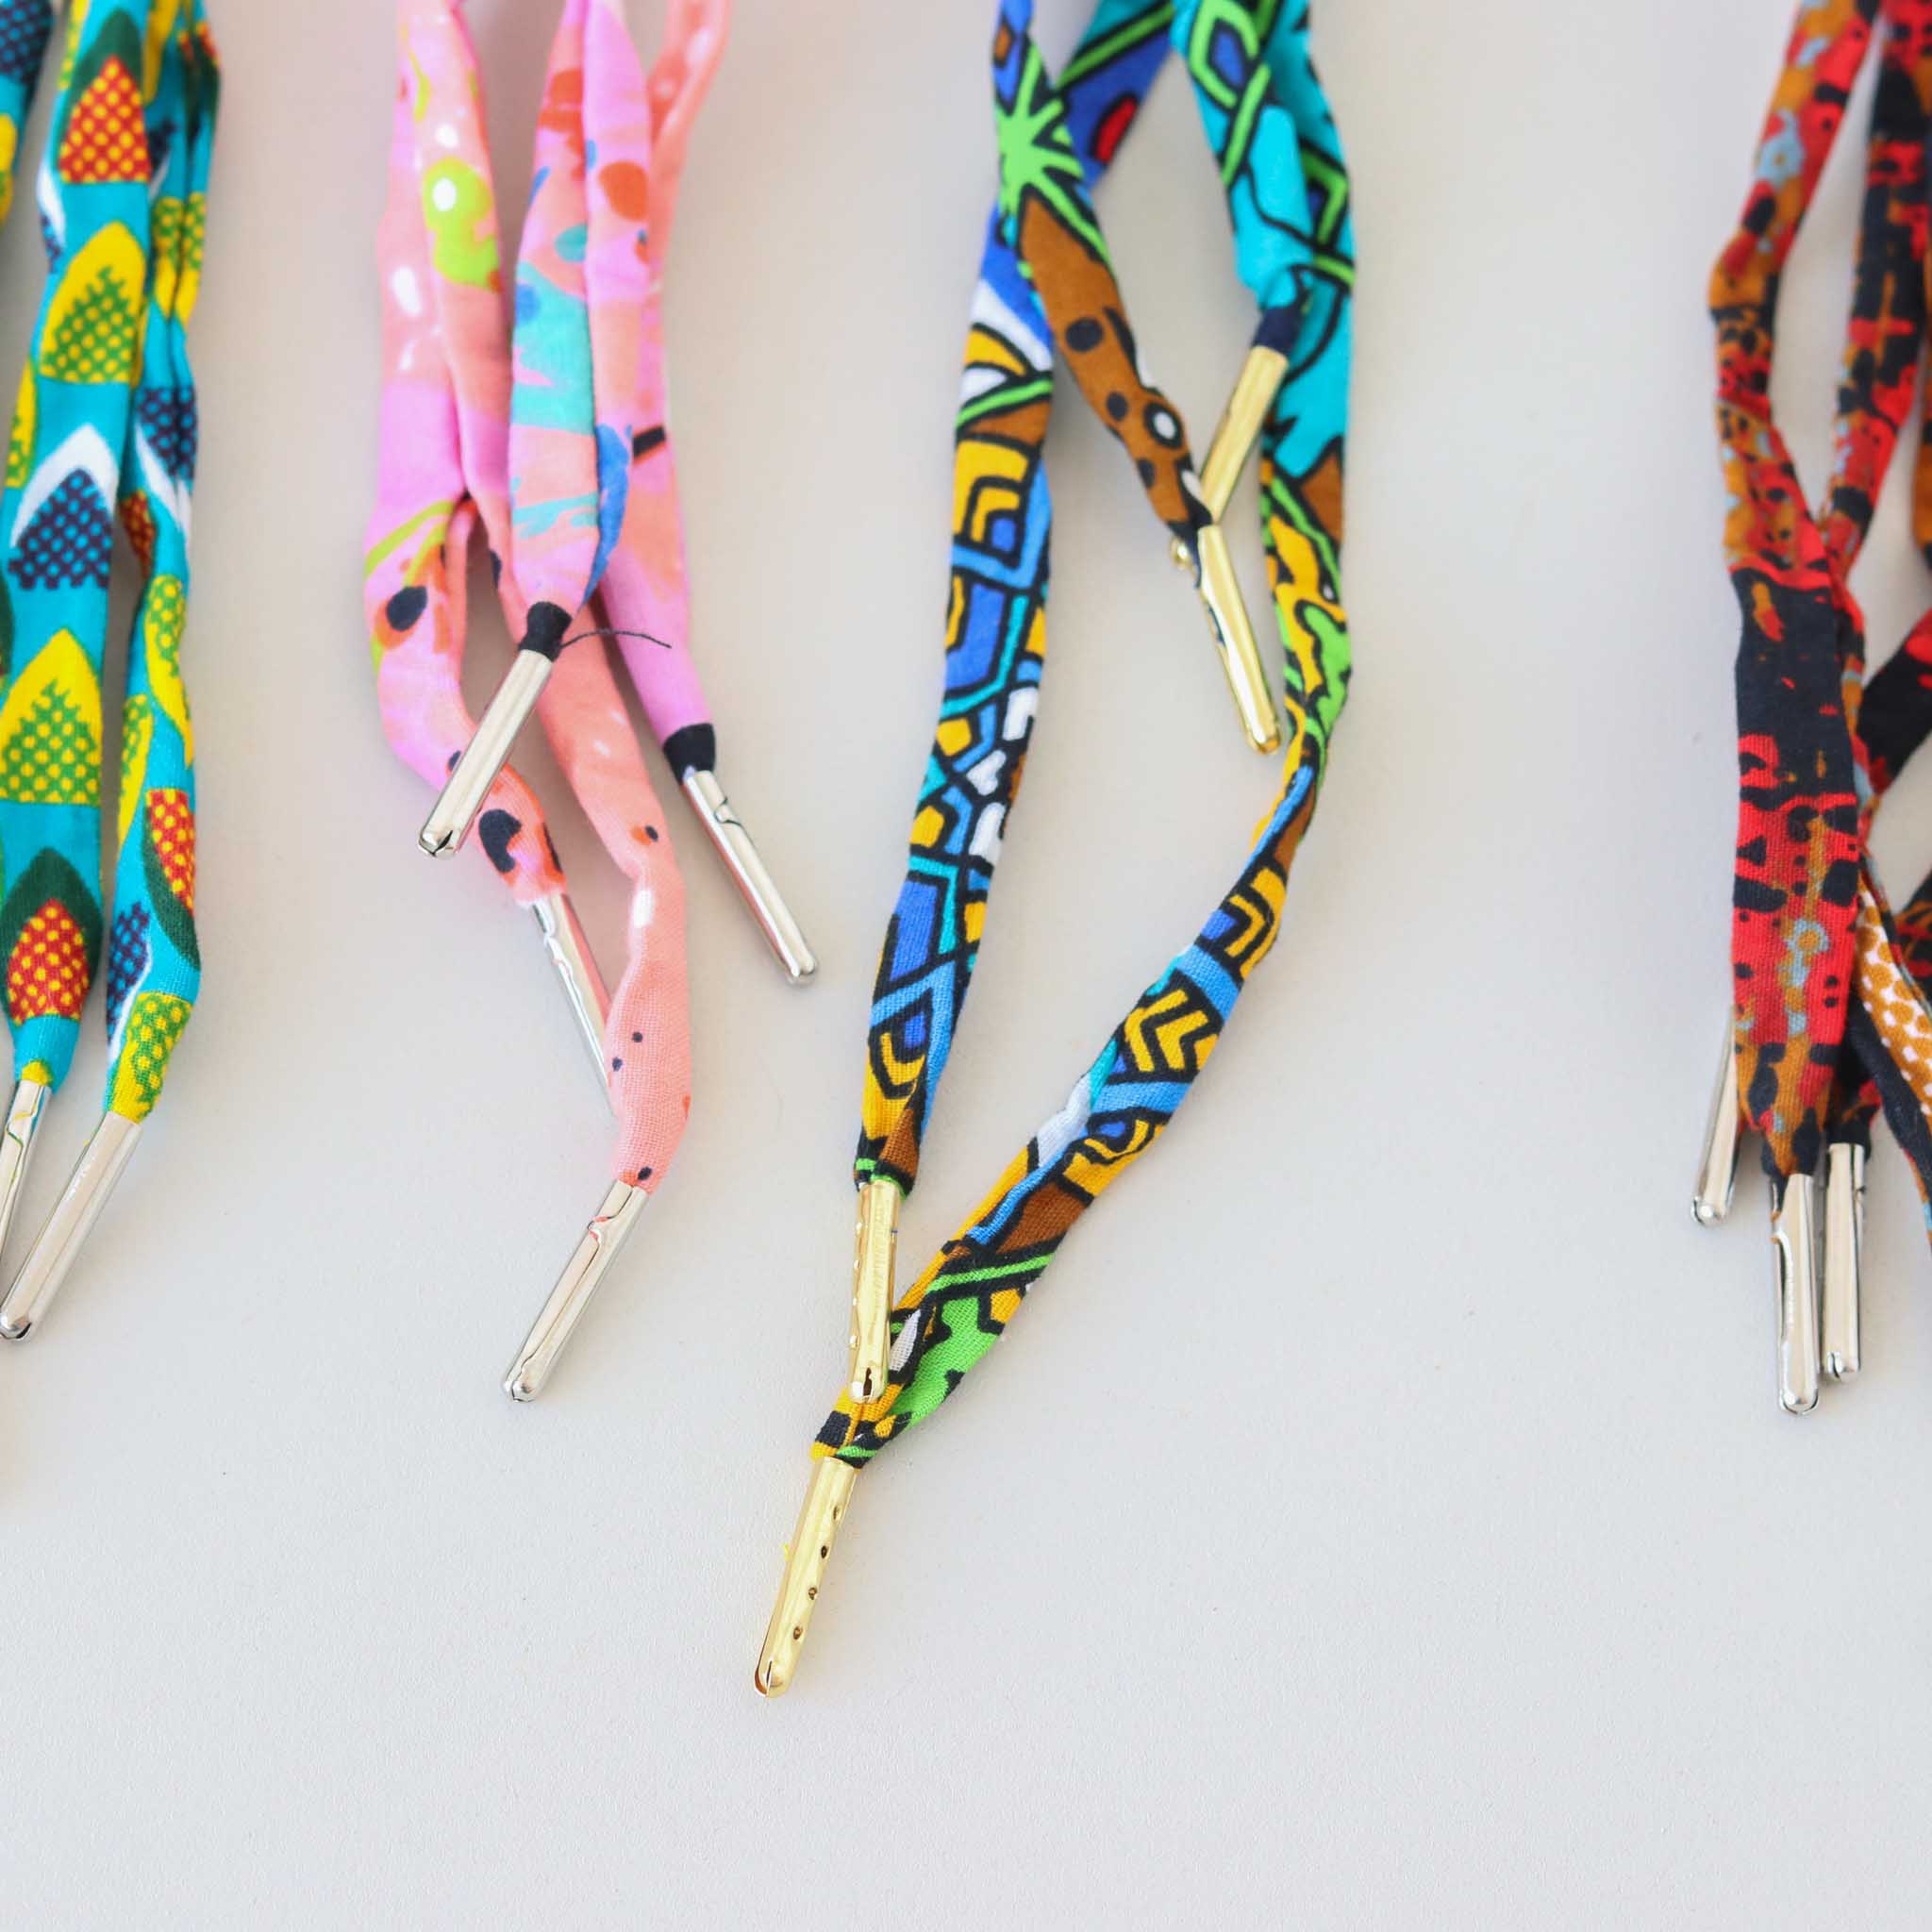 Liberian Shoelaces made for an African boutique